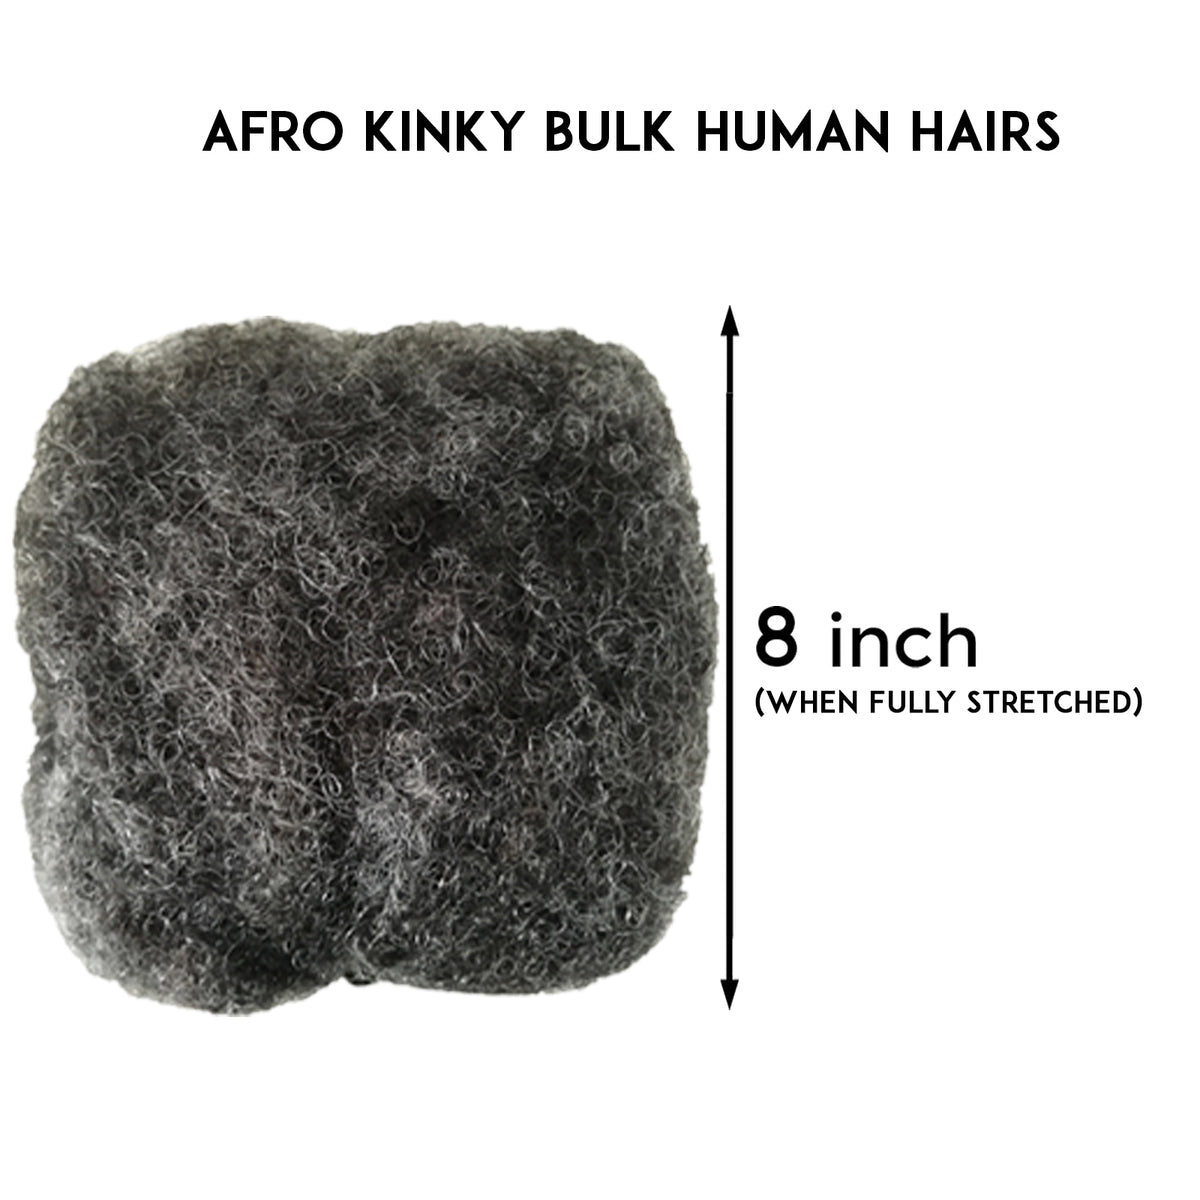 Afro Kinky Human Hairs For Making,Repairing & Bulking Locs 8 Inch Long Afro Kinky Bulk Human Hair For Dreadlock Extensions 100% Natural Afro Hairs For Twisting & Braiding 29g/1Oz (Salt & Pepper, 8 Inch)